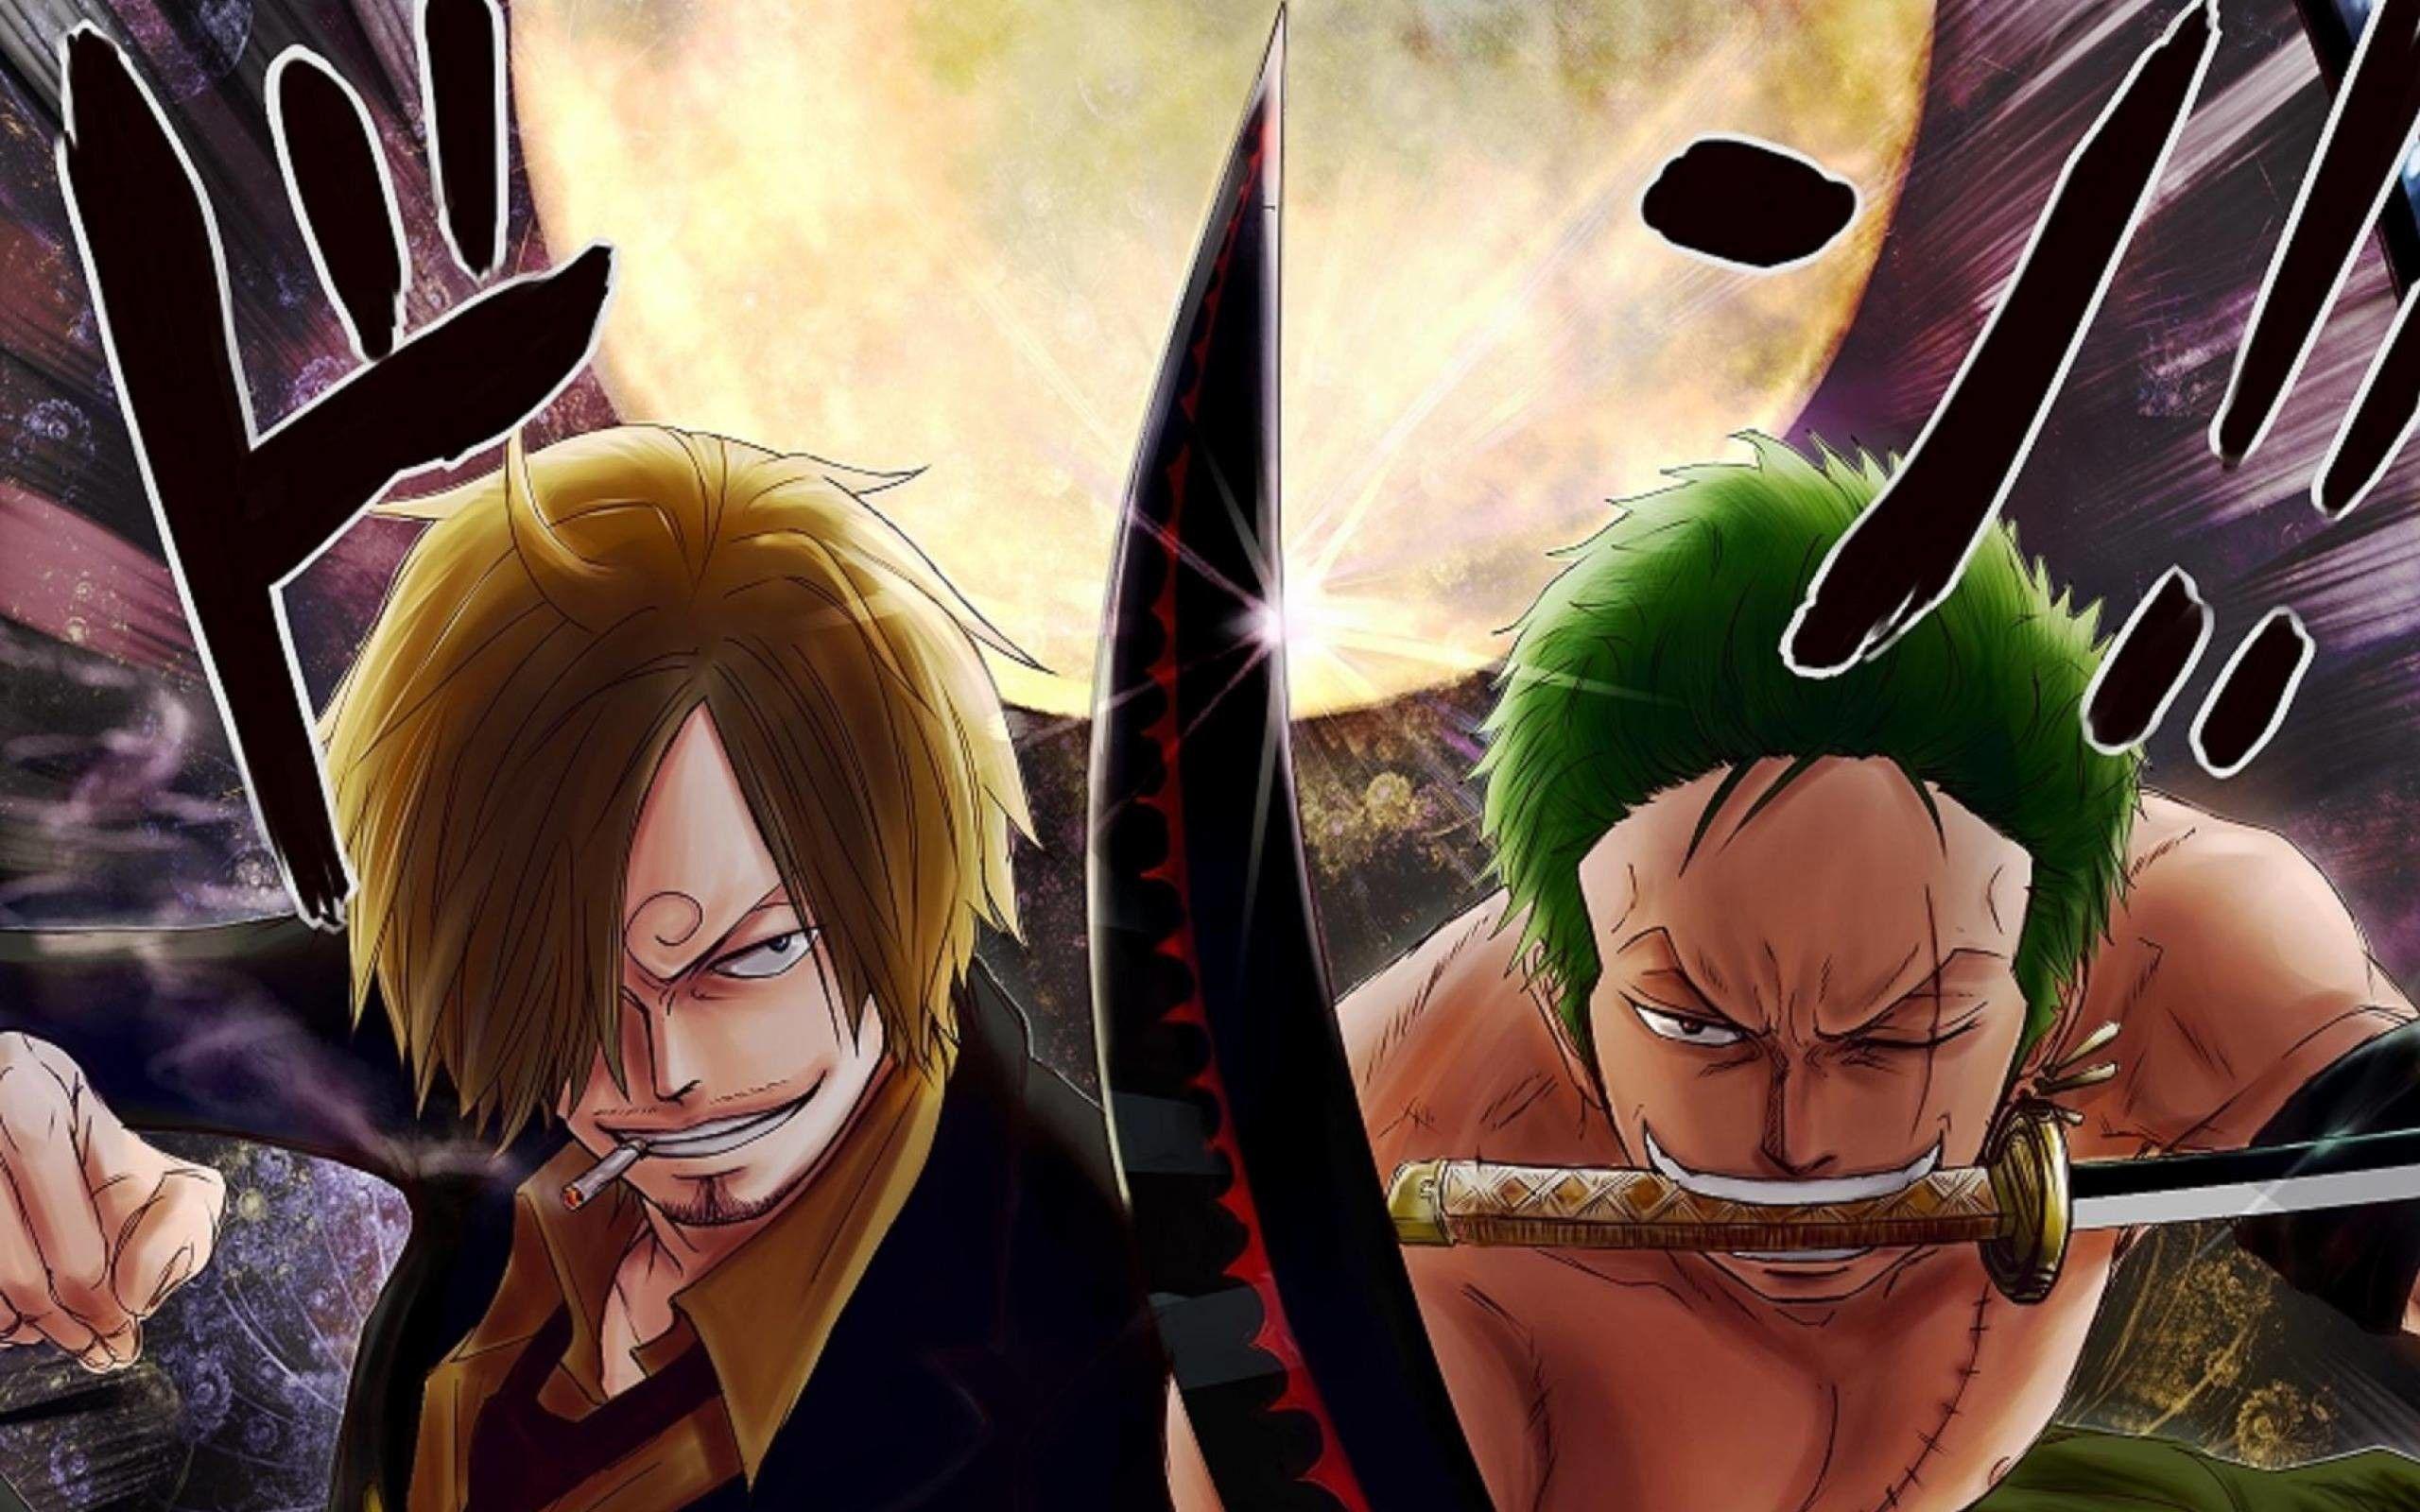 Drstoneart on X Luffy amp Zoro wallpaper  Designed By Me    Drstoneart1   ONEPIECE1071SPOILERS ONEPIECE luffy Zoro  ونبيس1071 httpstco7qVgWBGnD8  X